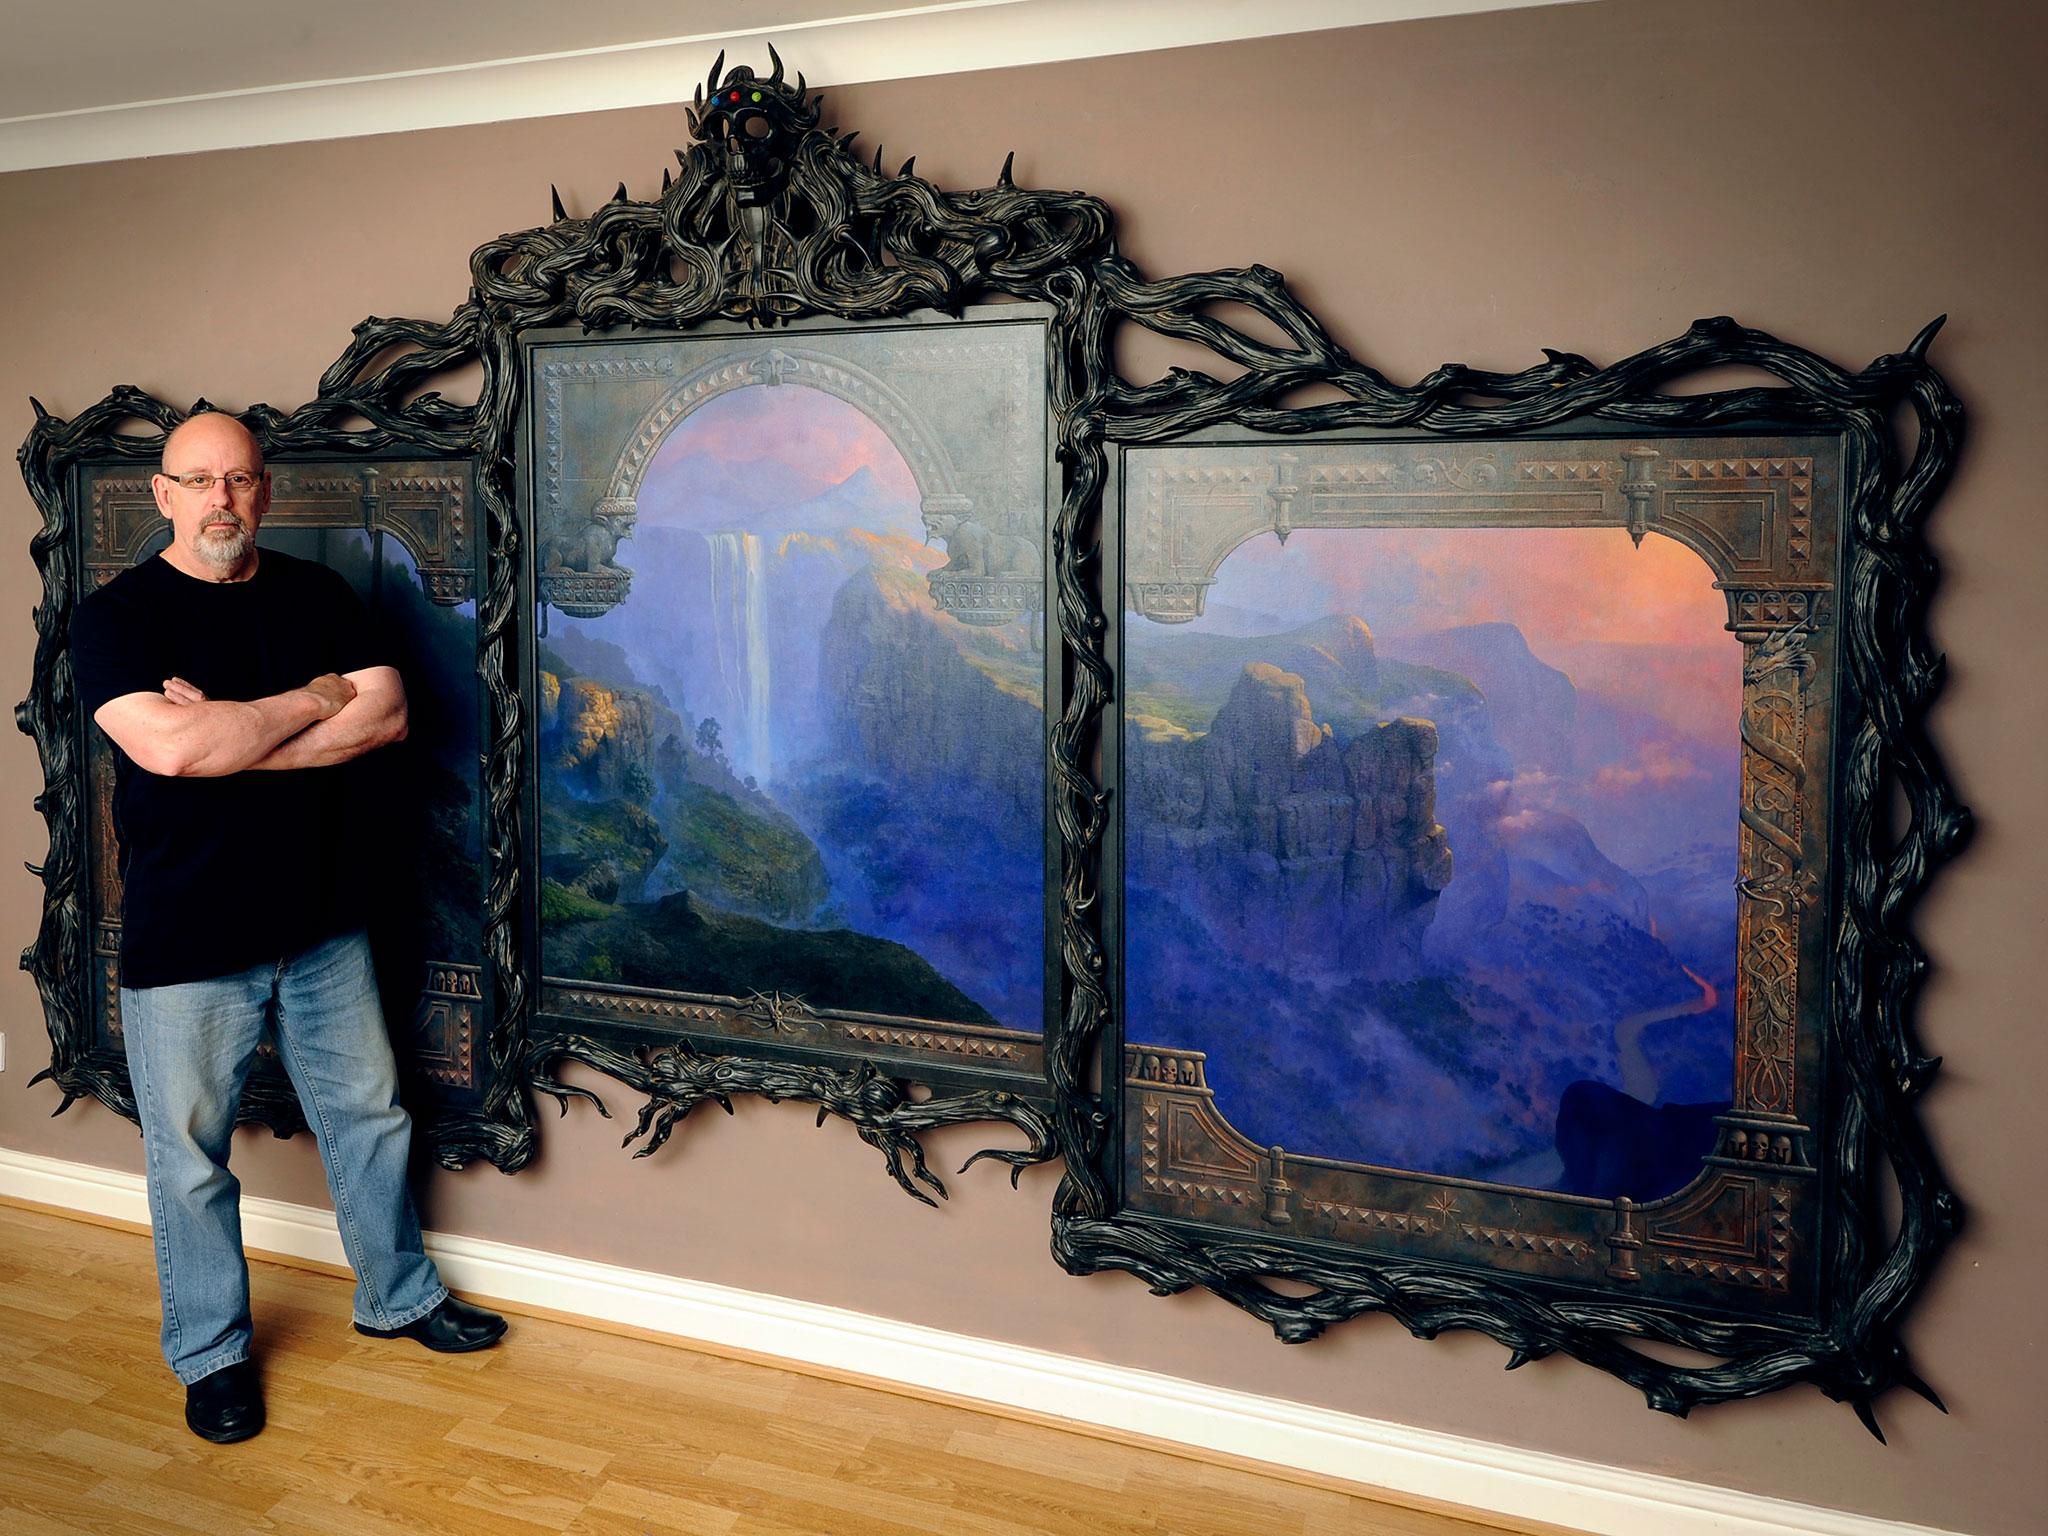 Gregory standing in front of his triptych ‘The Falls of Esgalduin’, which was inspired by Tolkien’s ‘The Silmarillion’